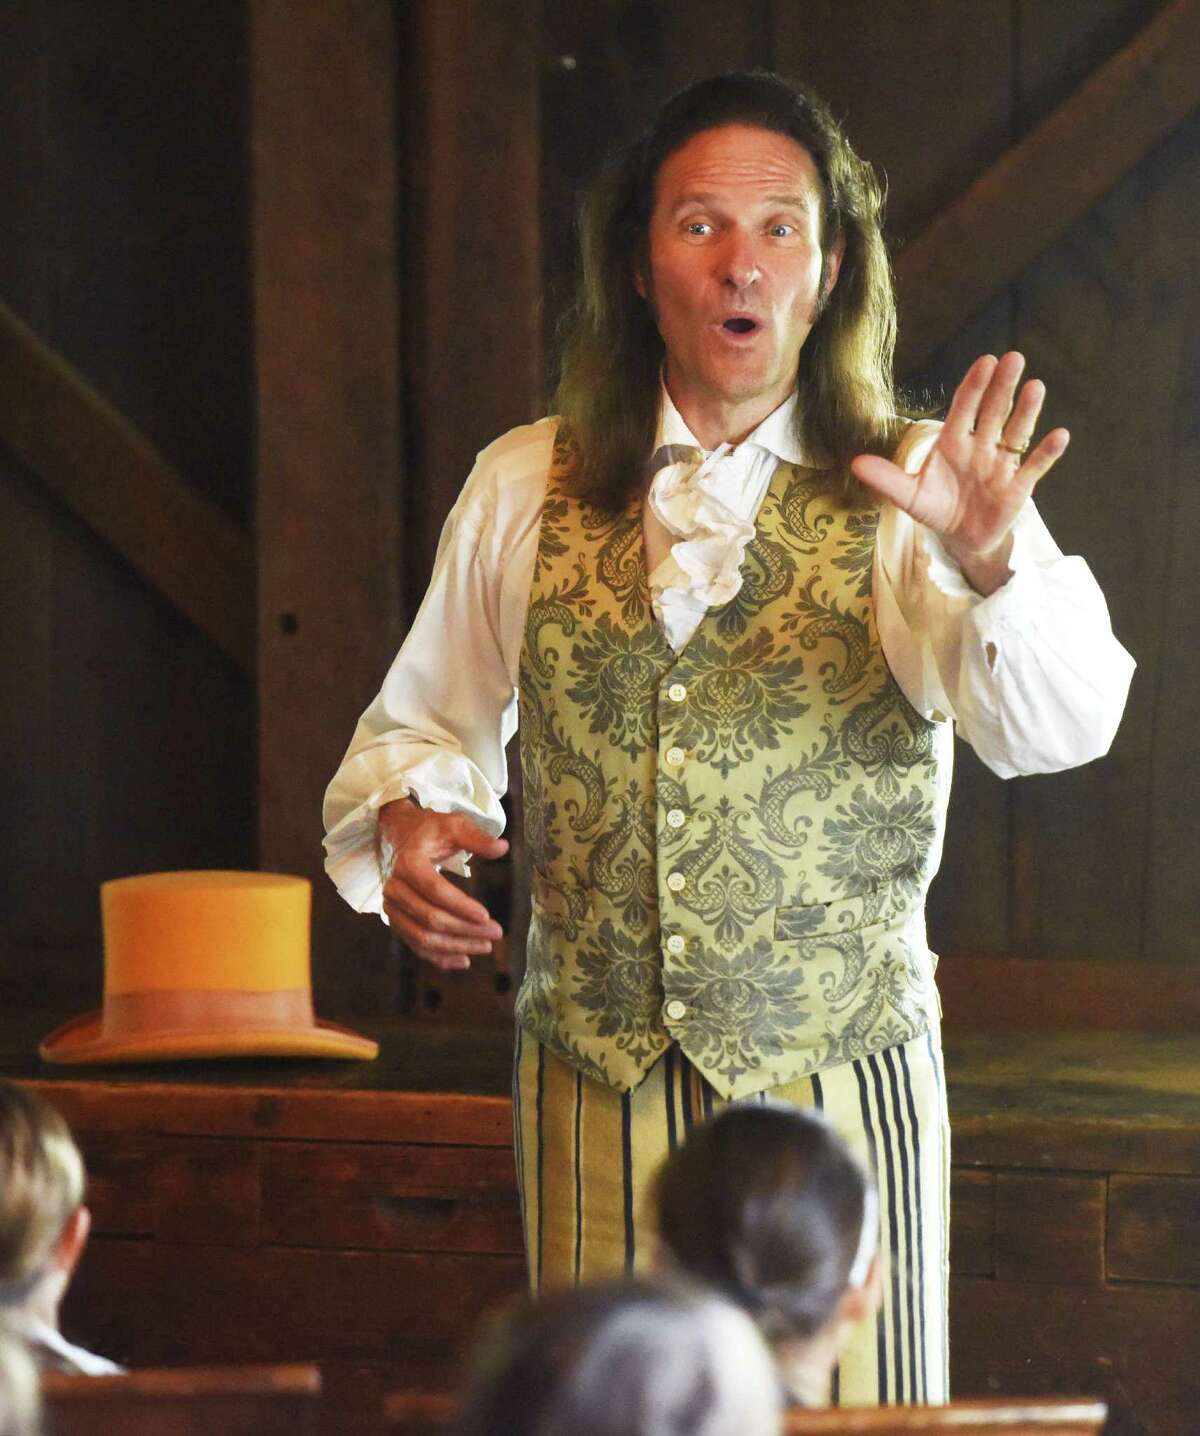 Historical storyteller Jonathan Kruk gives a performance during the Greenwich Historical Society History and Art Camp at the Bush-Holley House in Greenwich, Conn. Sunday, June 7, 2015.